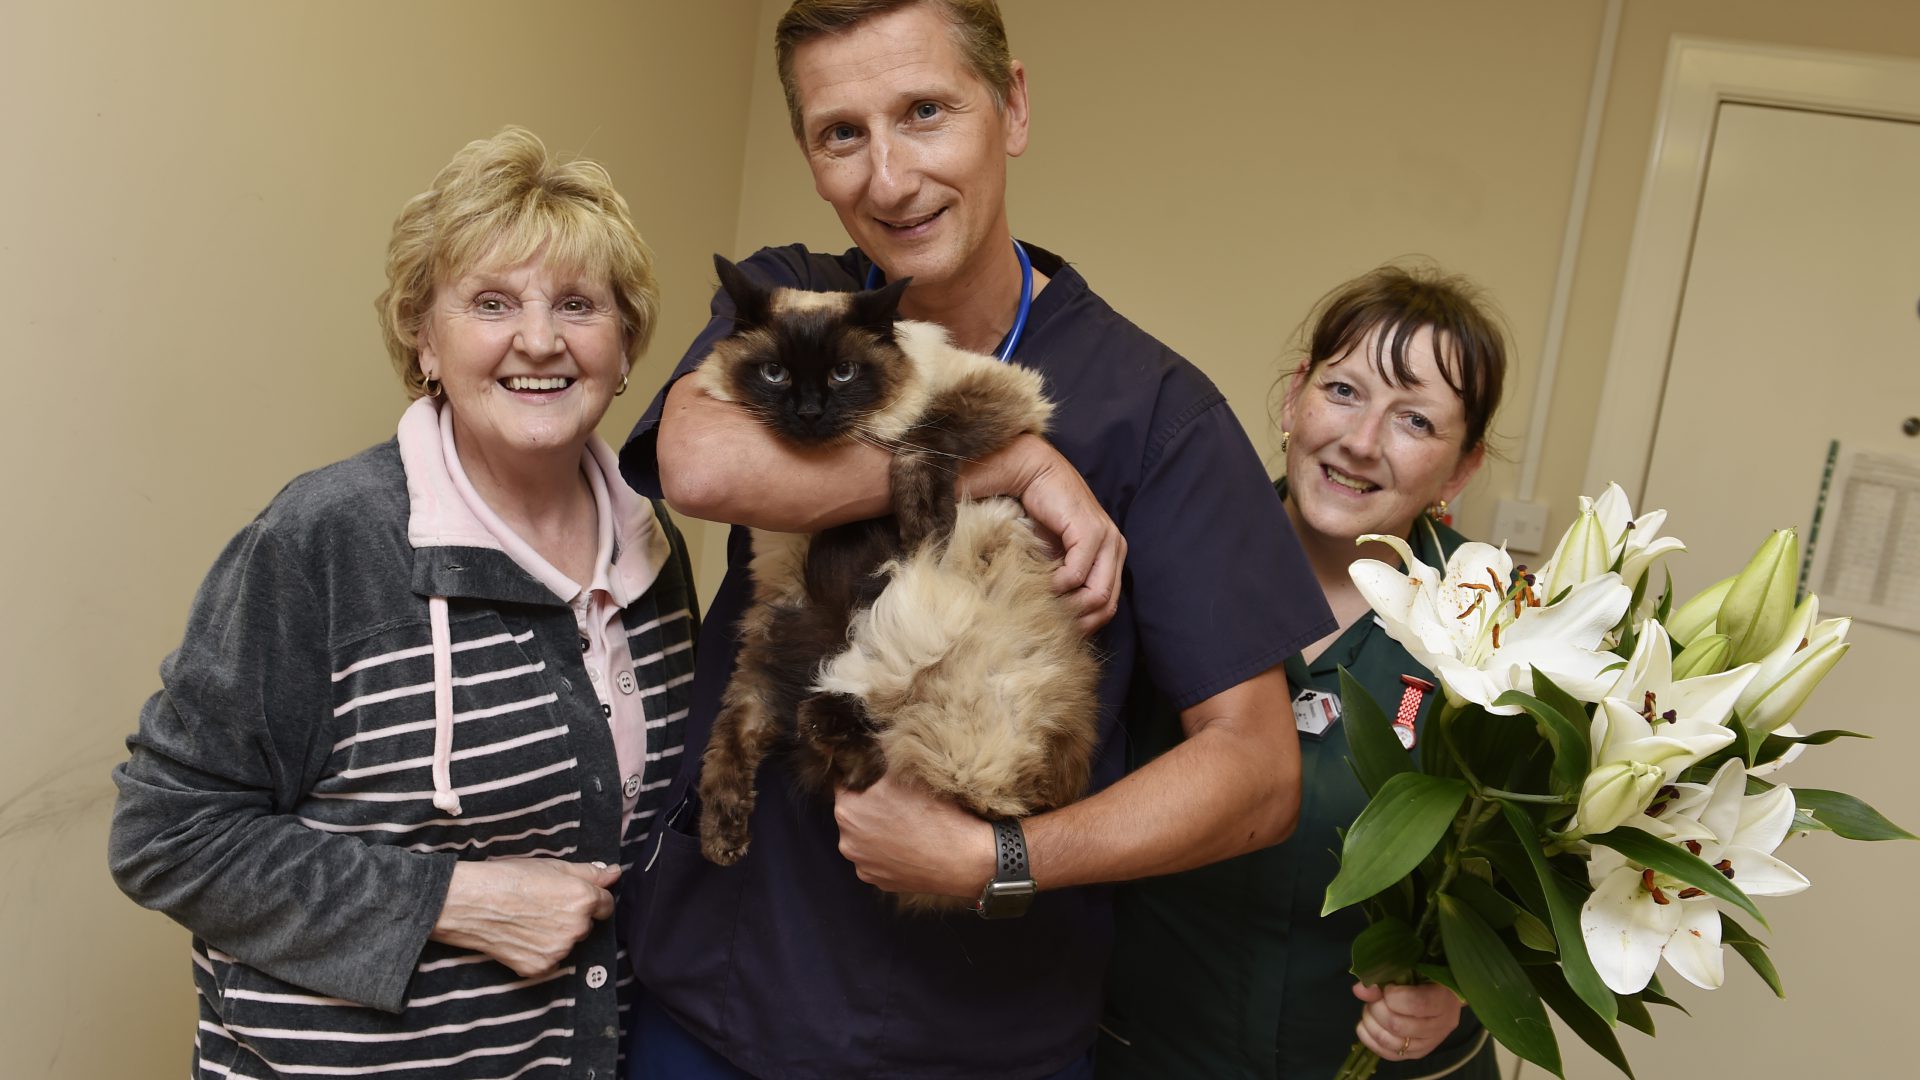 Vets warn of lily poisoning after Coco the cat comes back from brink of death – twice